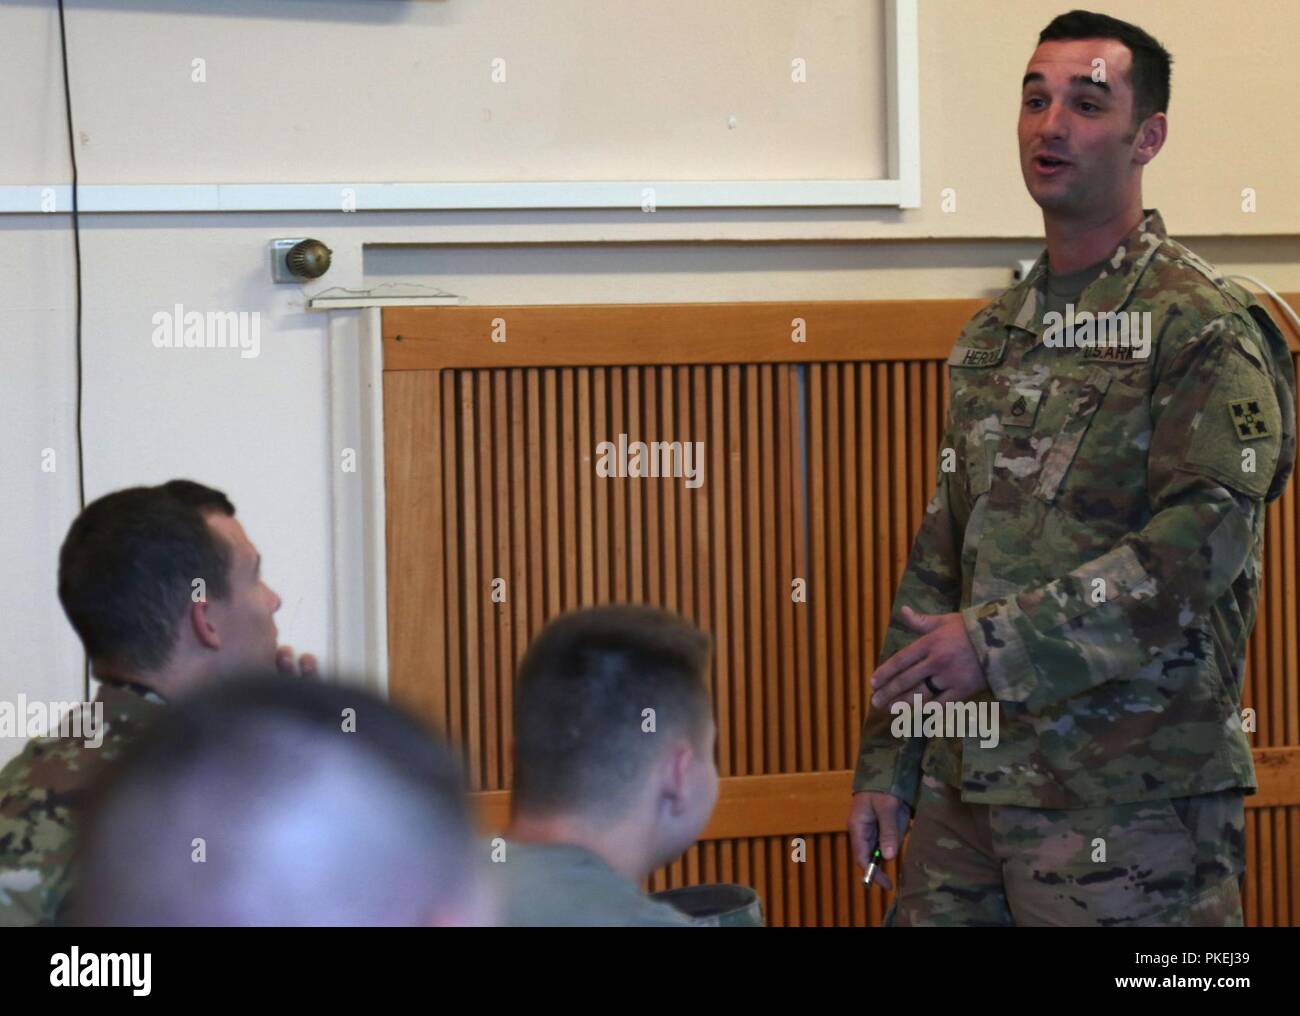 Staff Sgt. James Heroux, a chemical, biological, radiological and nuclear specialist with Headquarters and Support Company, 404th Aviation Support Battalion, 4th Combat Aviation Brigade, explains formulas meant to calculate the trajectory of a fired 5.56 mm round during his Master Marksmanship Course lecture in Illesheim Army Air Field, Germany, August 10, 2018. Heroux is one of the few small arms master gunners able to teach the MCC for 4th CAB, preparing Soldiers to quickly respond to threats and ensure support to European allies during Operation Atlantic Resolve. Stock Photo